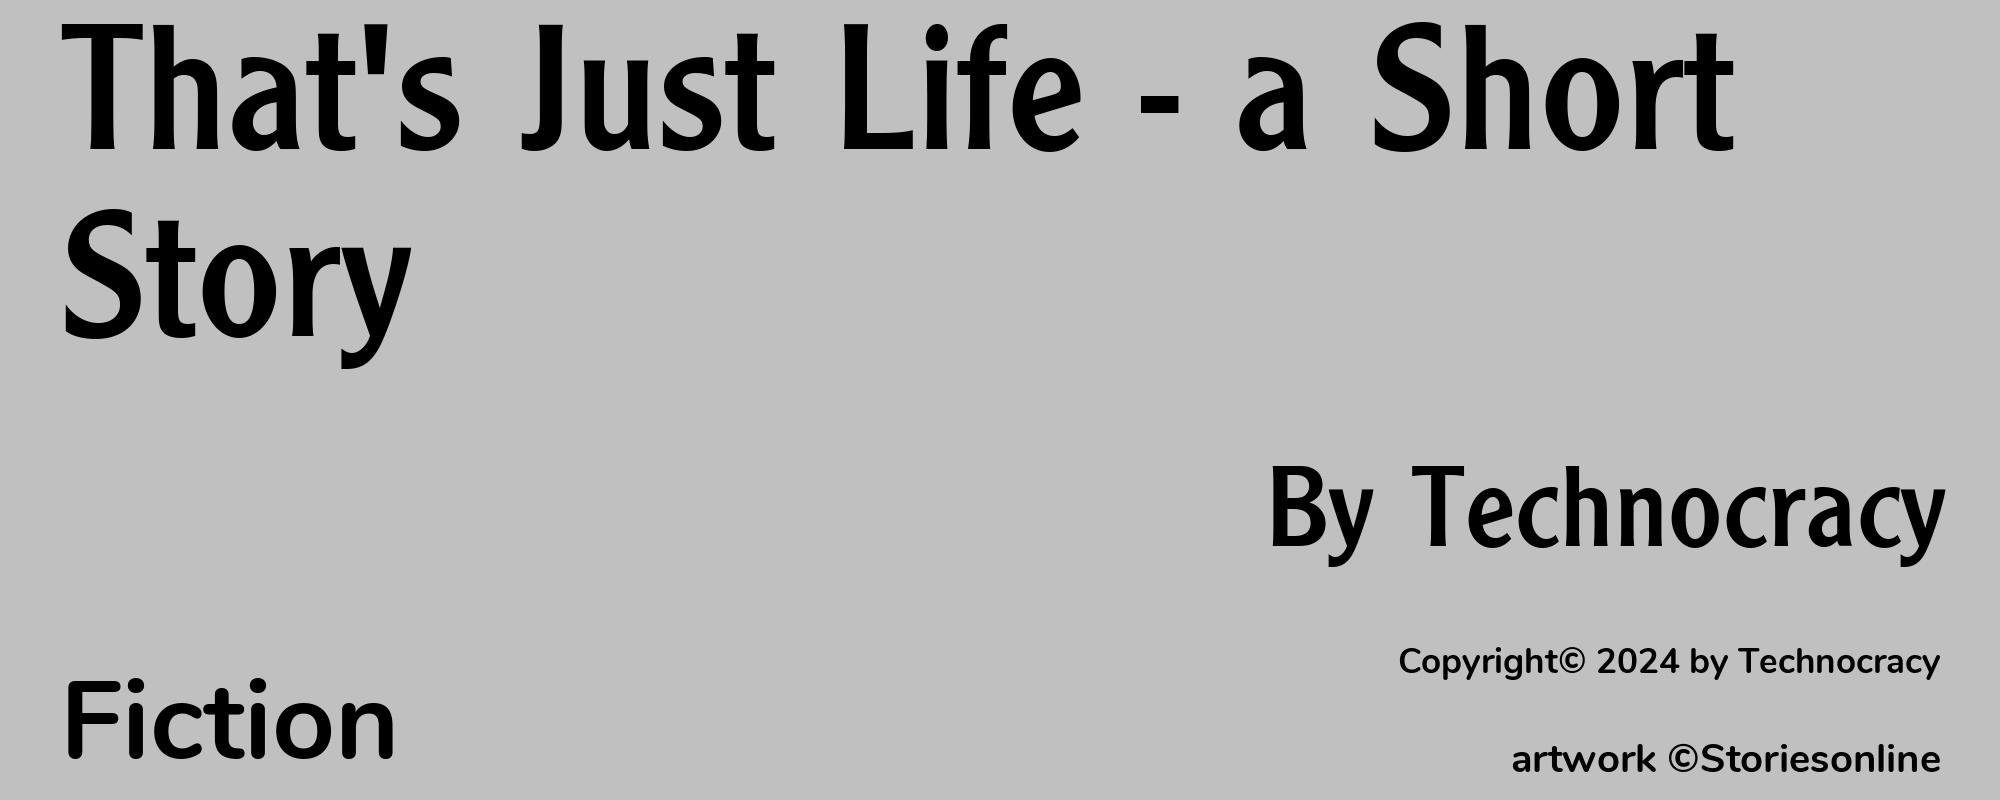 That's Just Life - a Short Story - Cover